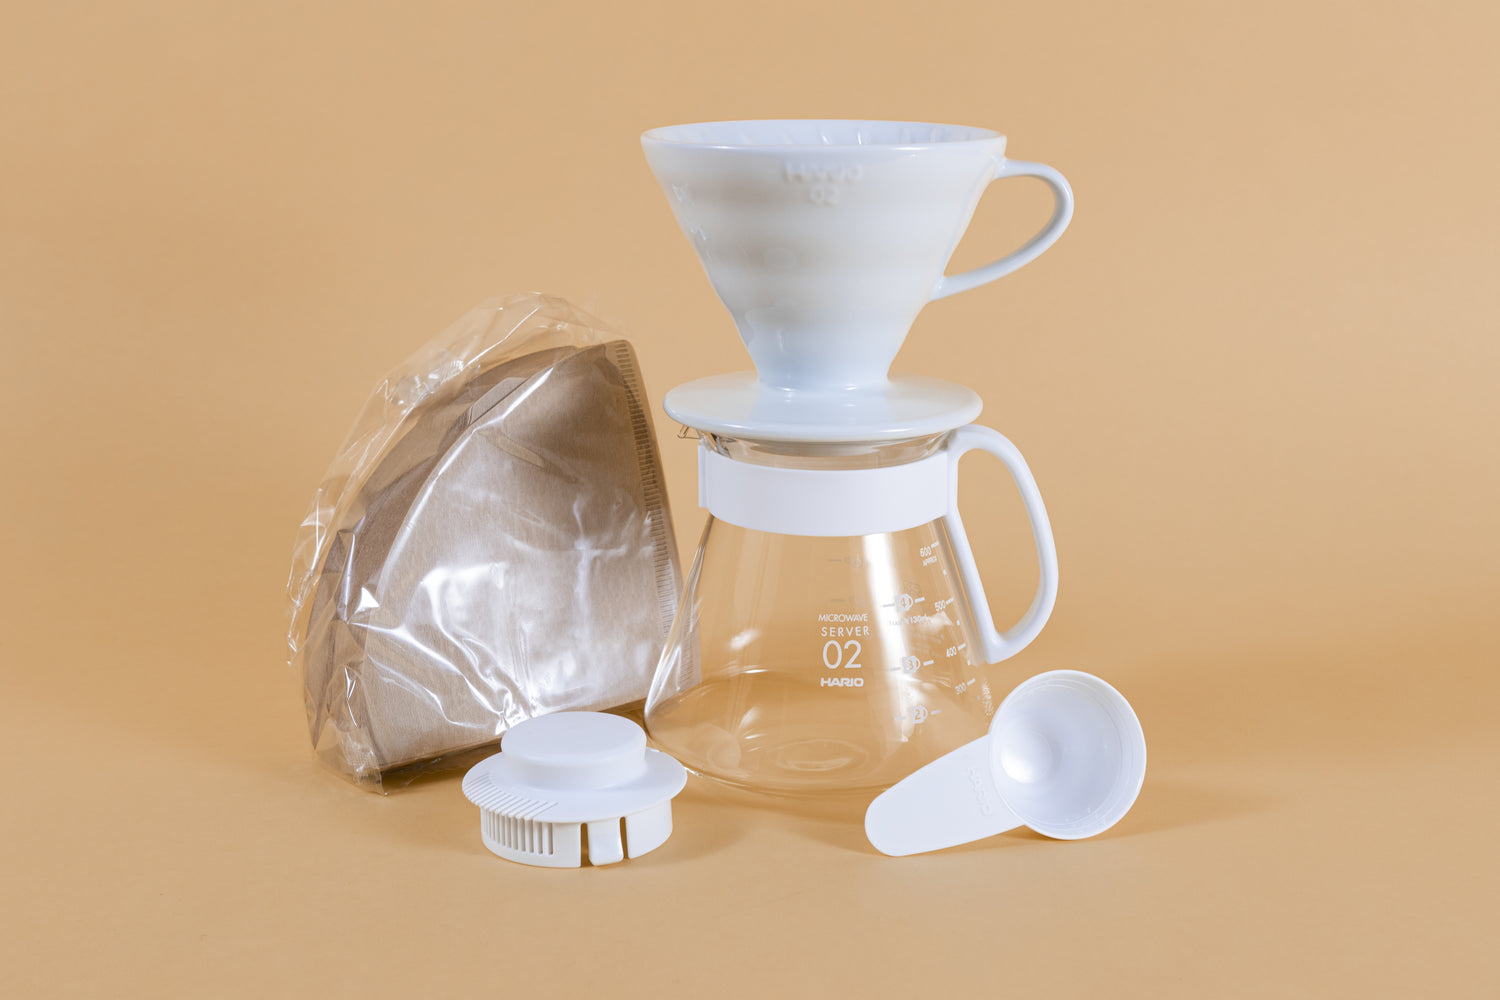 White cone shaped ceramic dripper with handle sitting on a glass server with white plastic handle next to pack of brown cone filters white plastic lid and scoop.